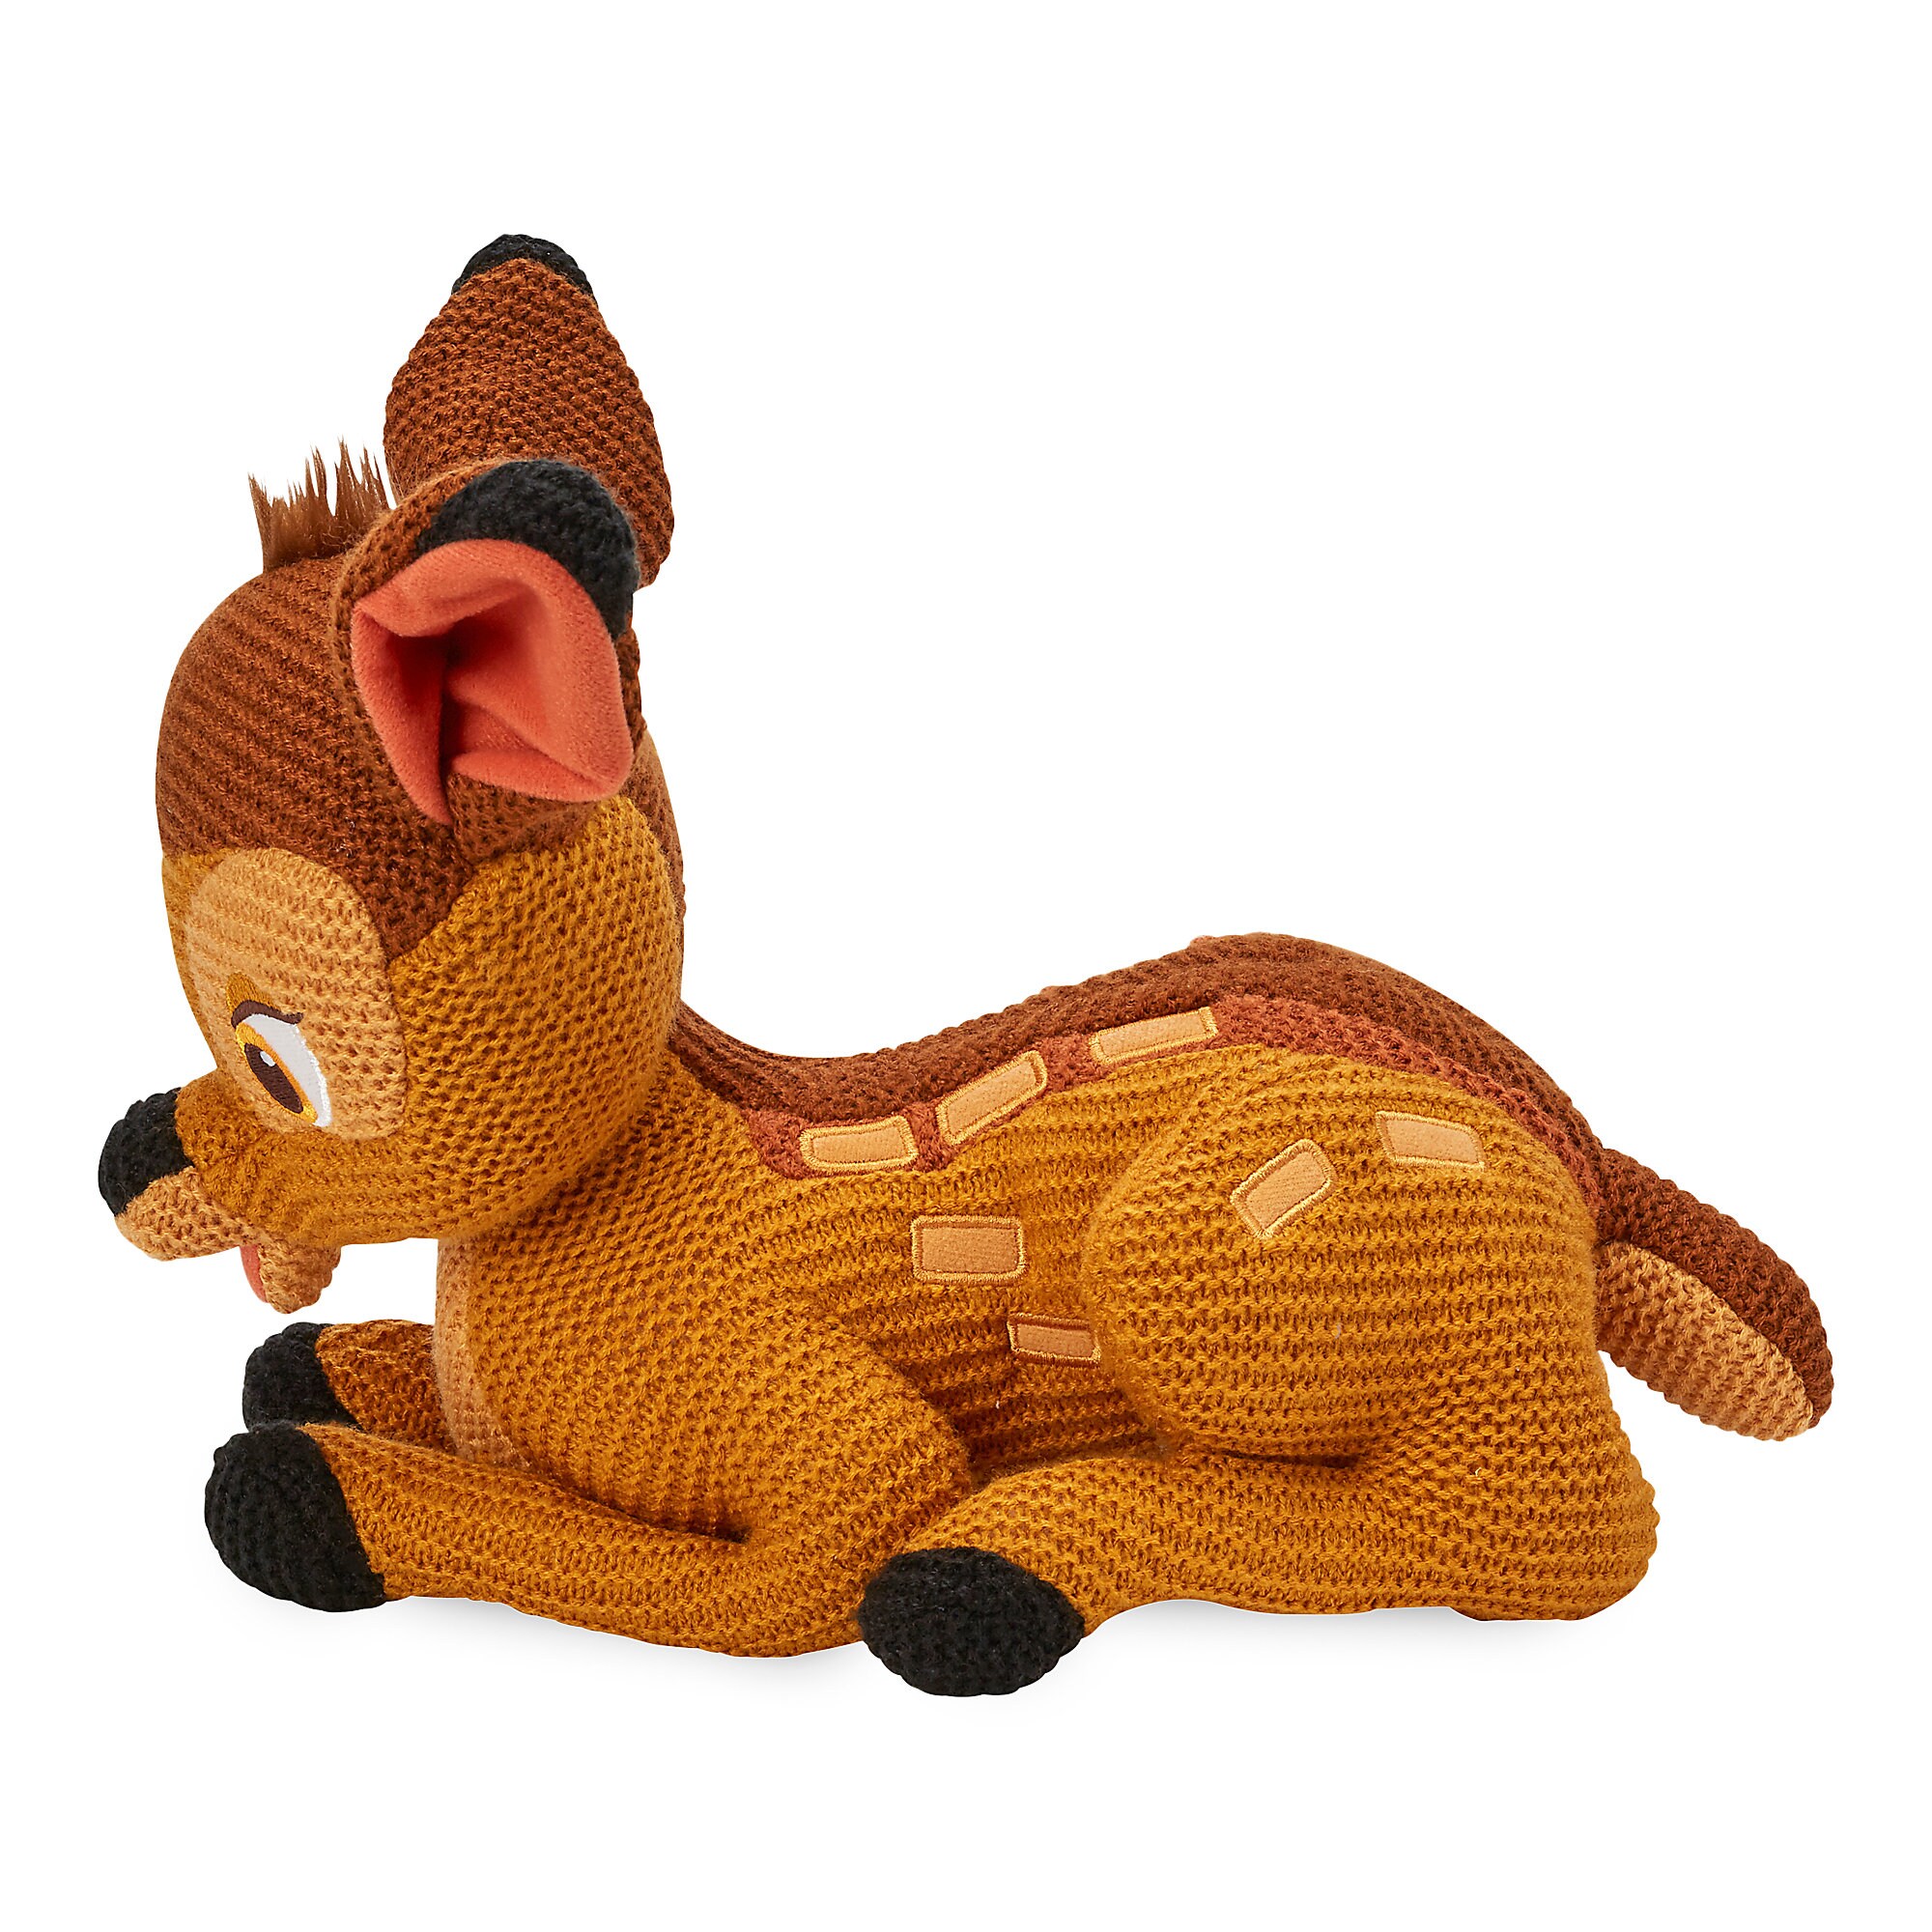 Bambi Knit Plush - 12 1/2'' - Limited Release